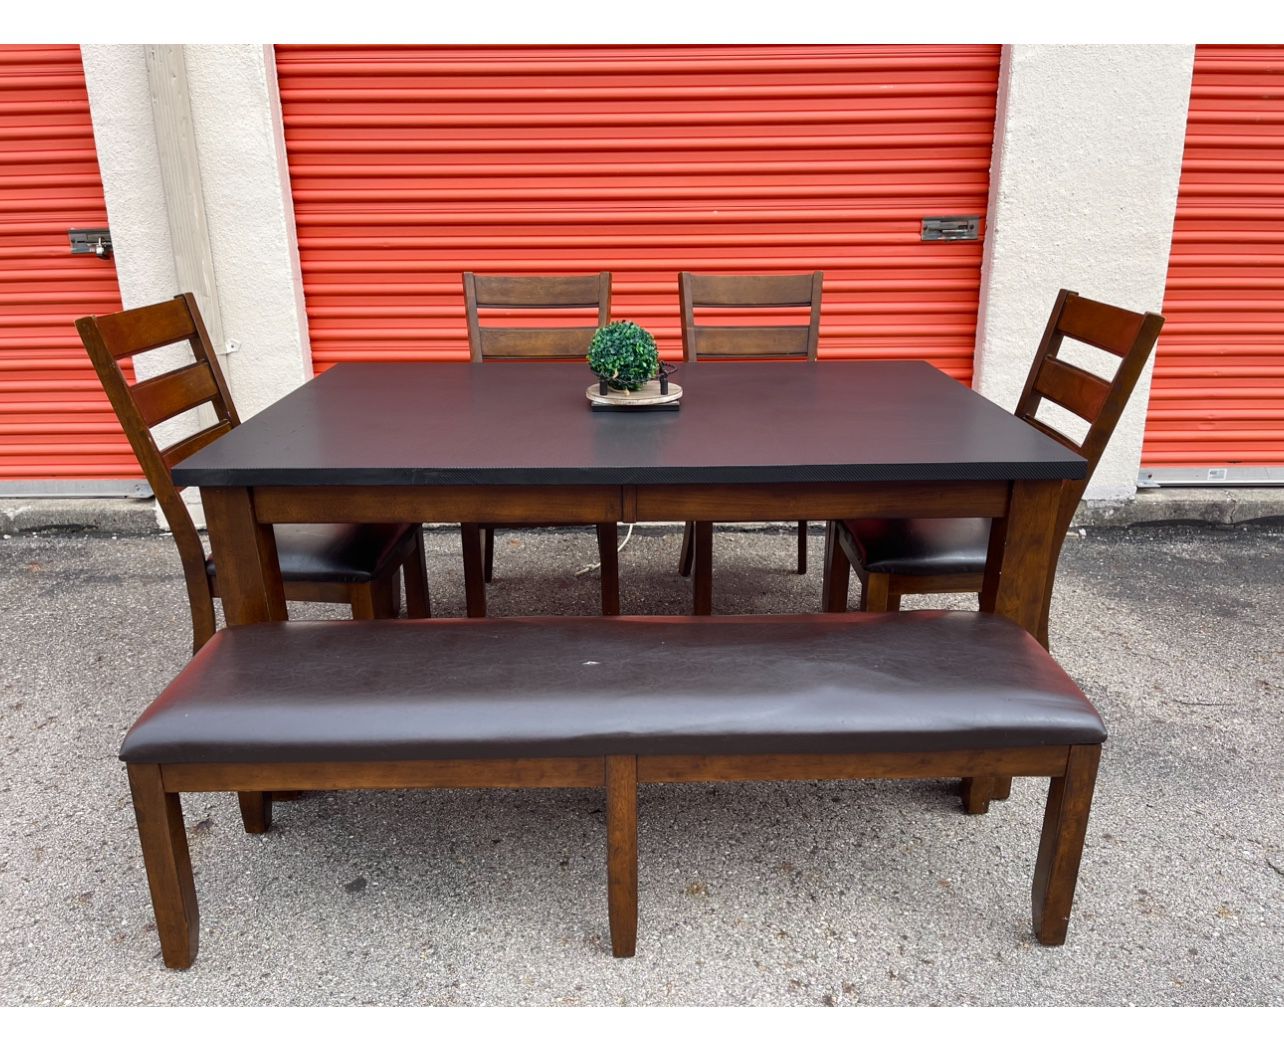 Well Loved Large Dining Table, 4 Chairs And Bench